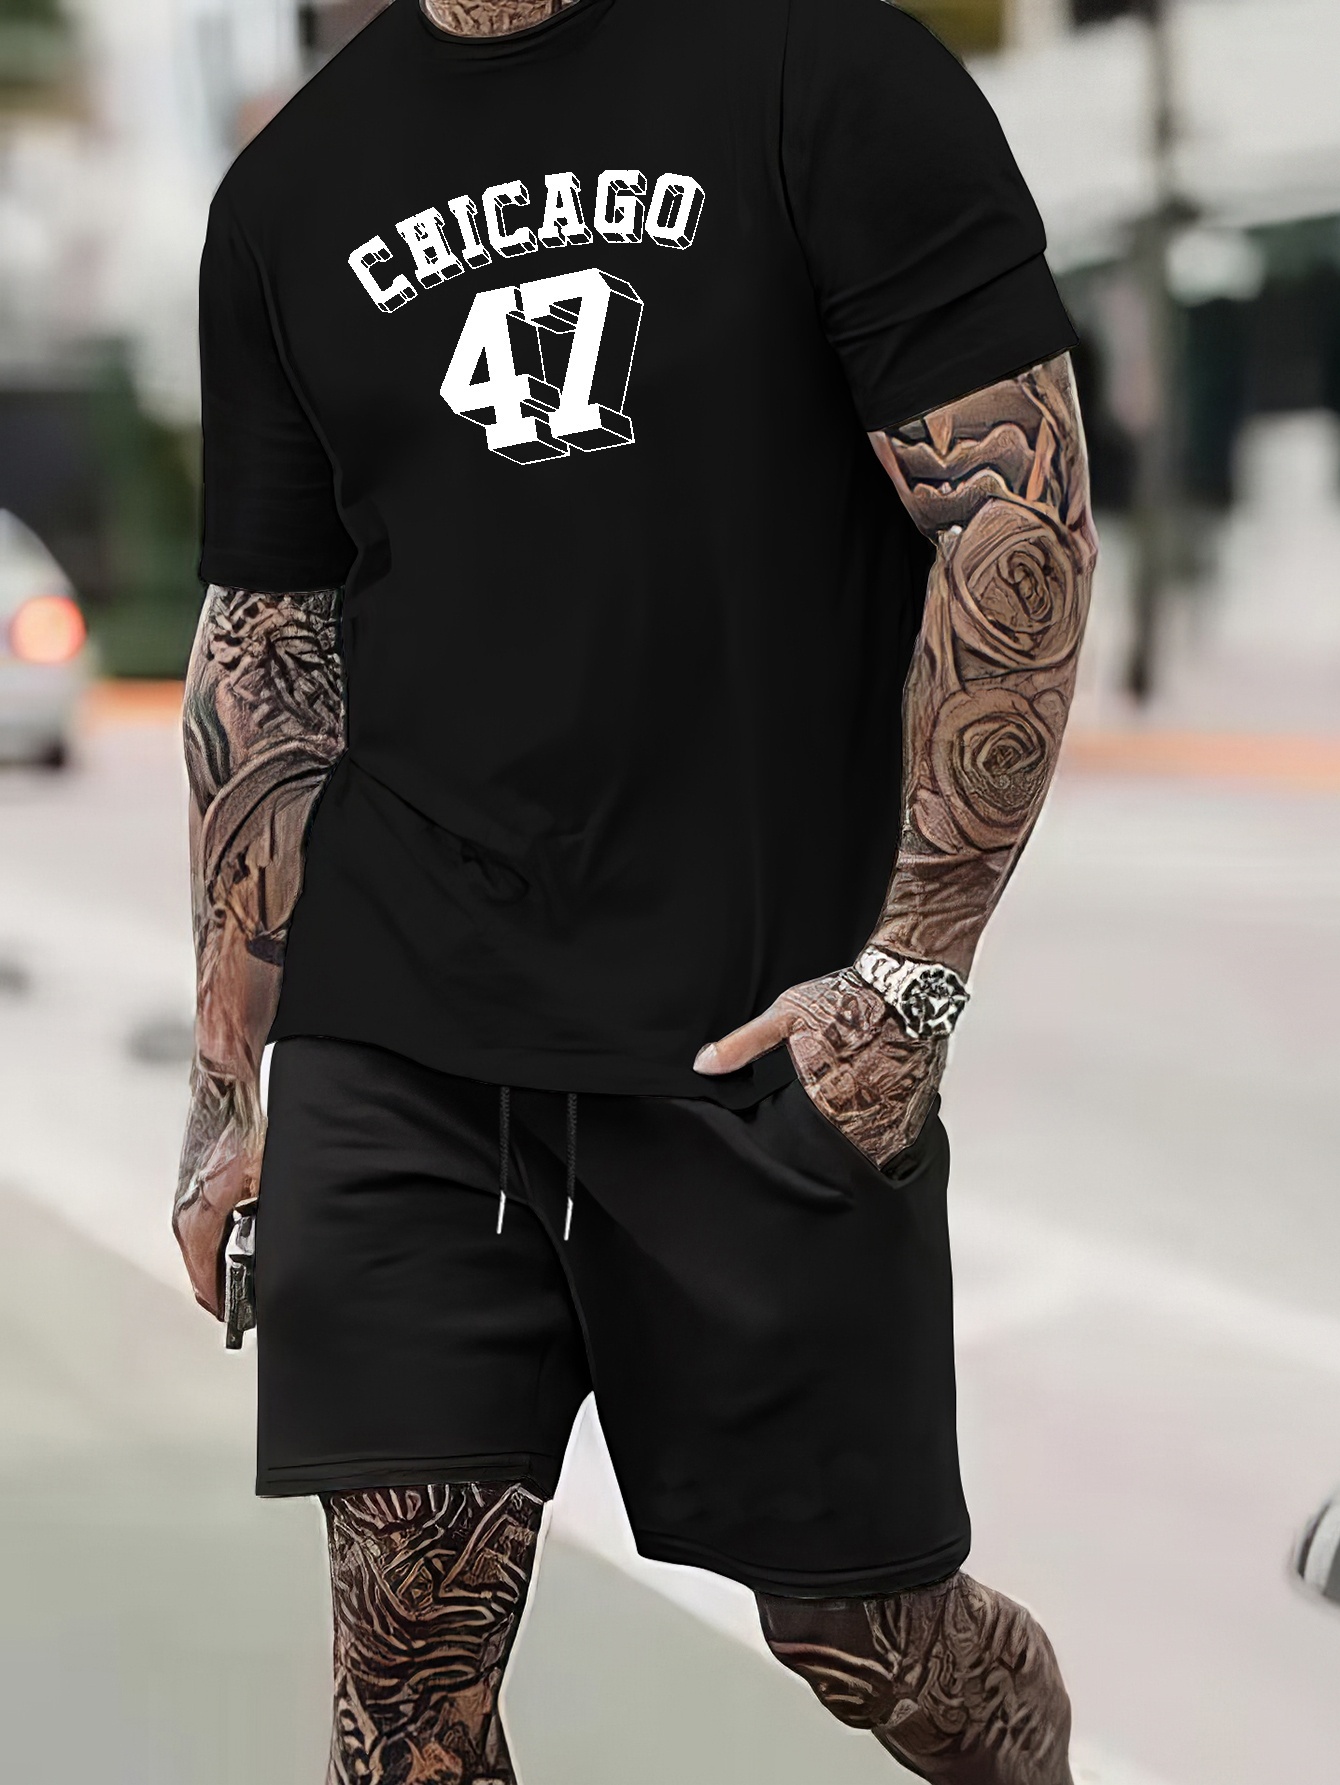 Chicago 47 Graphic Print Men's Comfortable Crew Neck Short Sleeve T-shirt &  Shorts Sets, Summer Casual Trendy Clothing